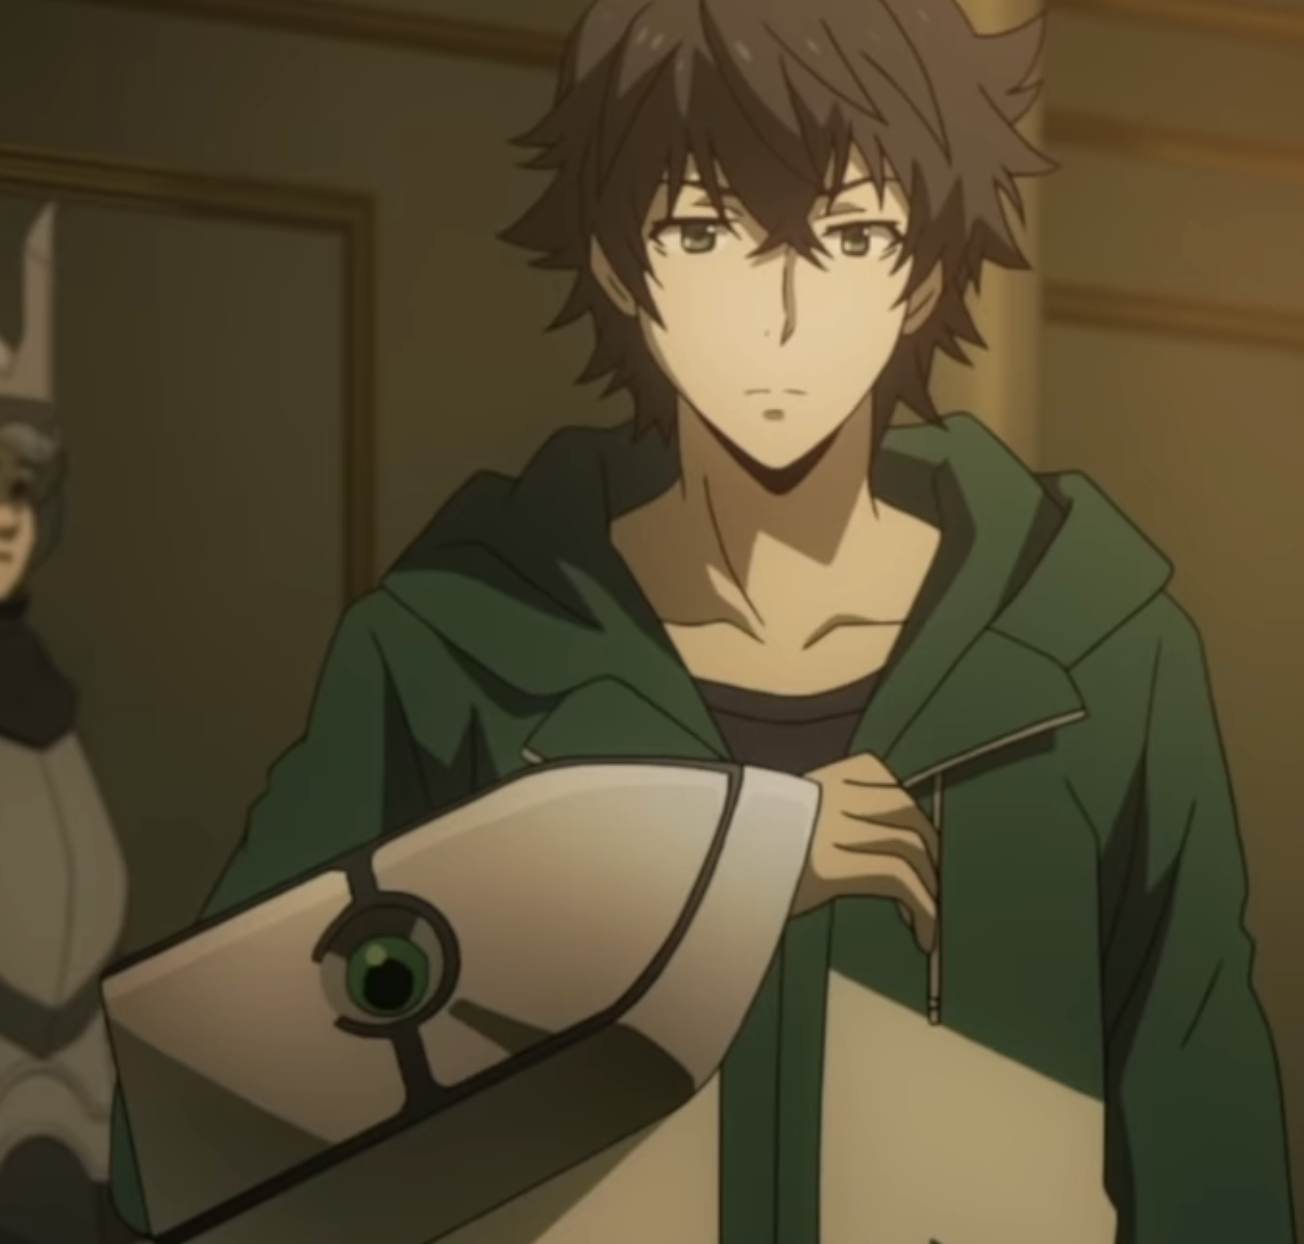 Naofumi looking at the shield attached to his arm